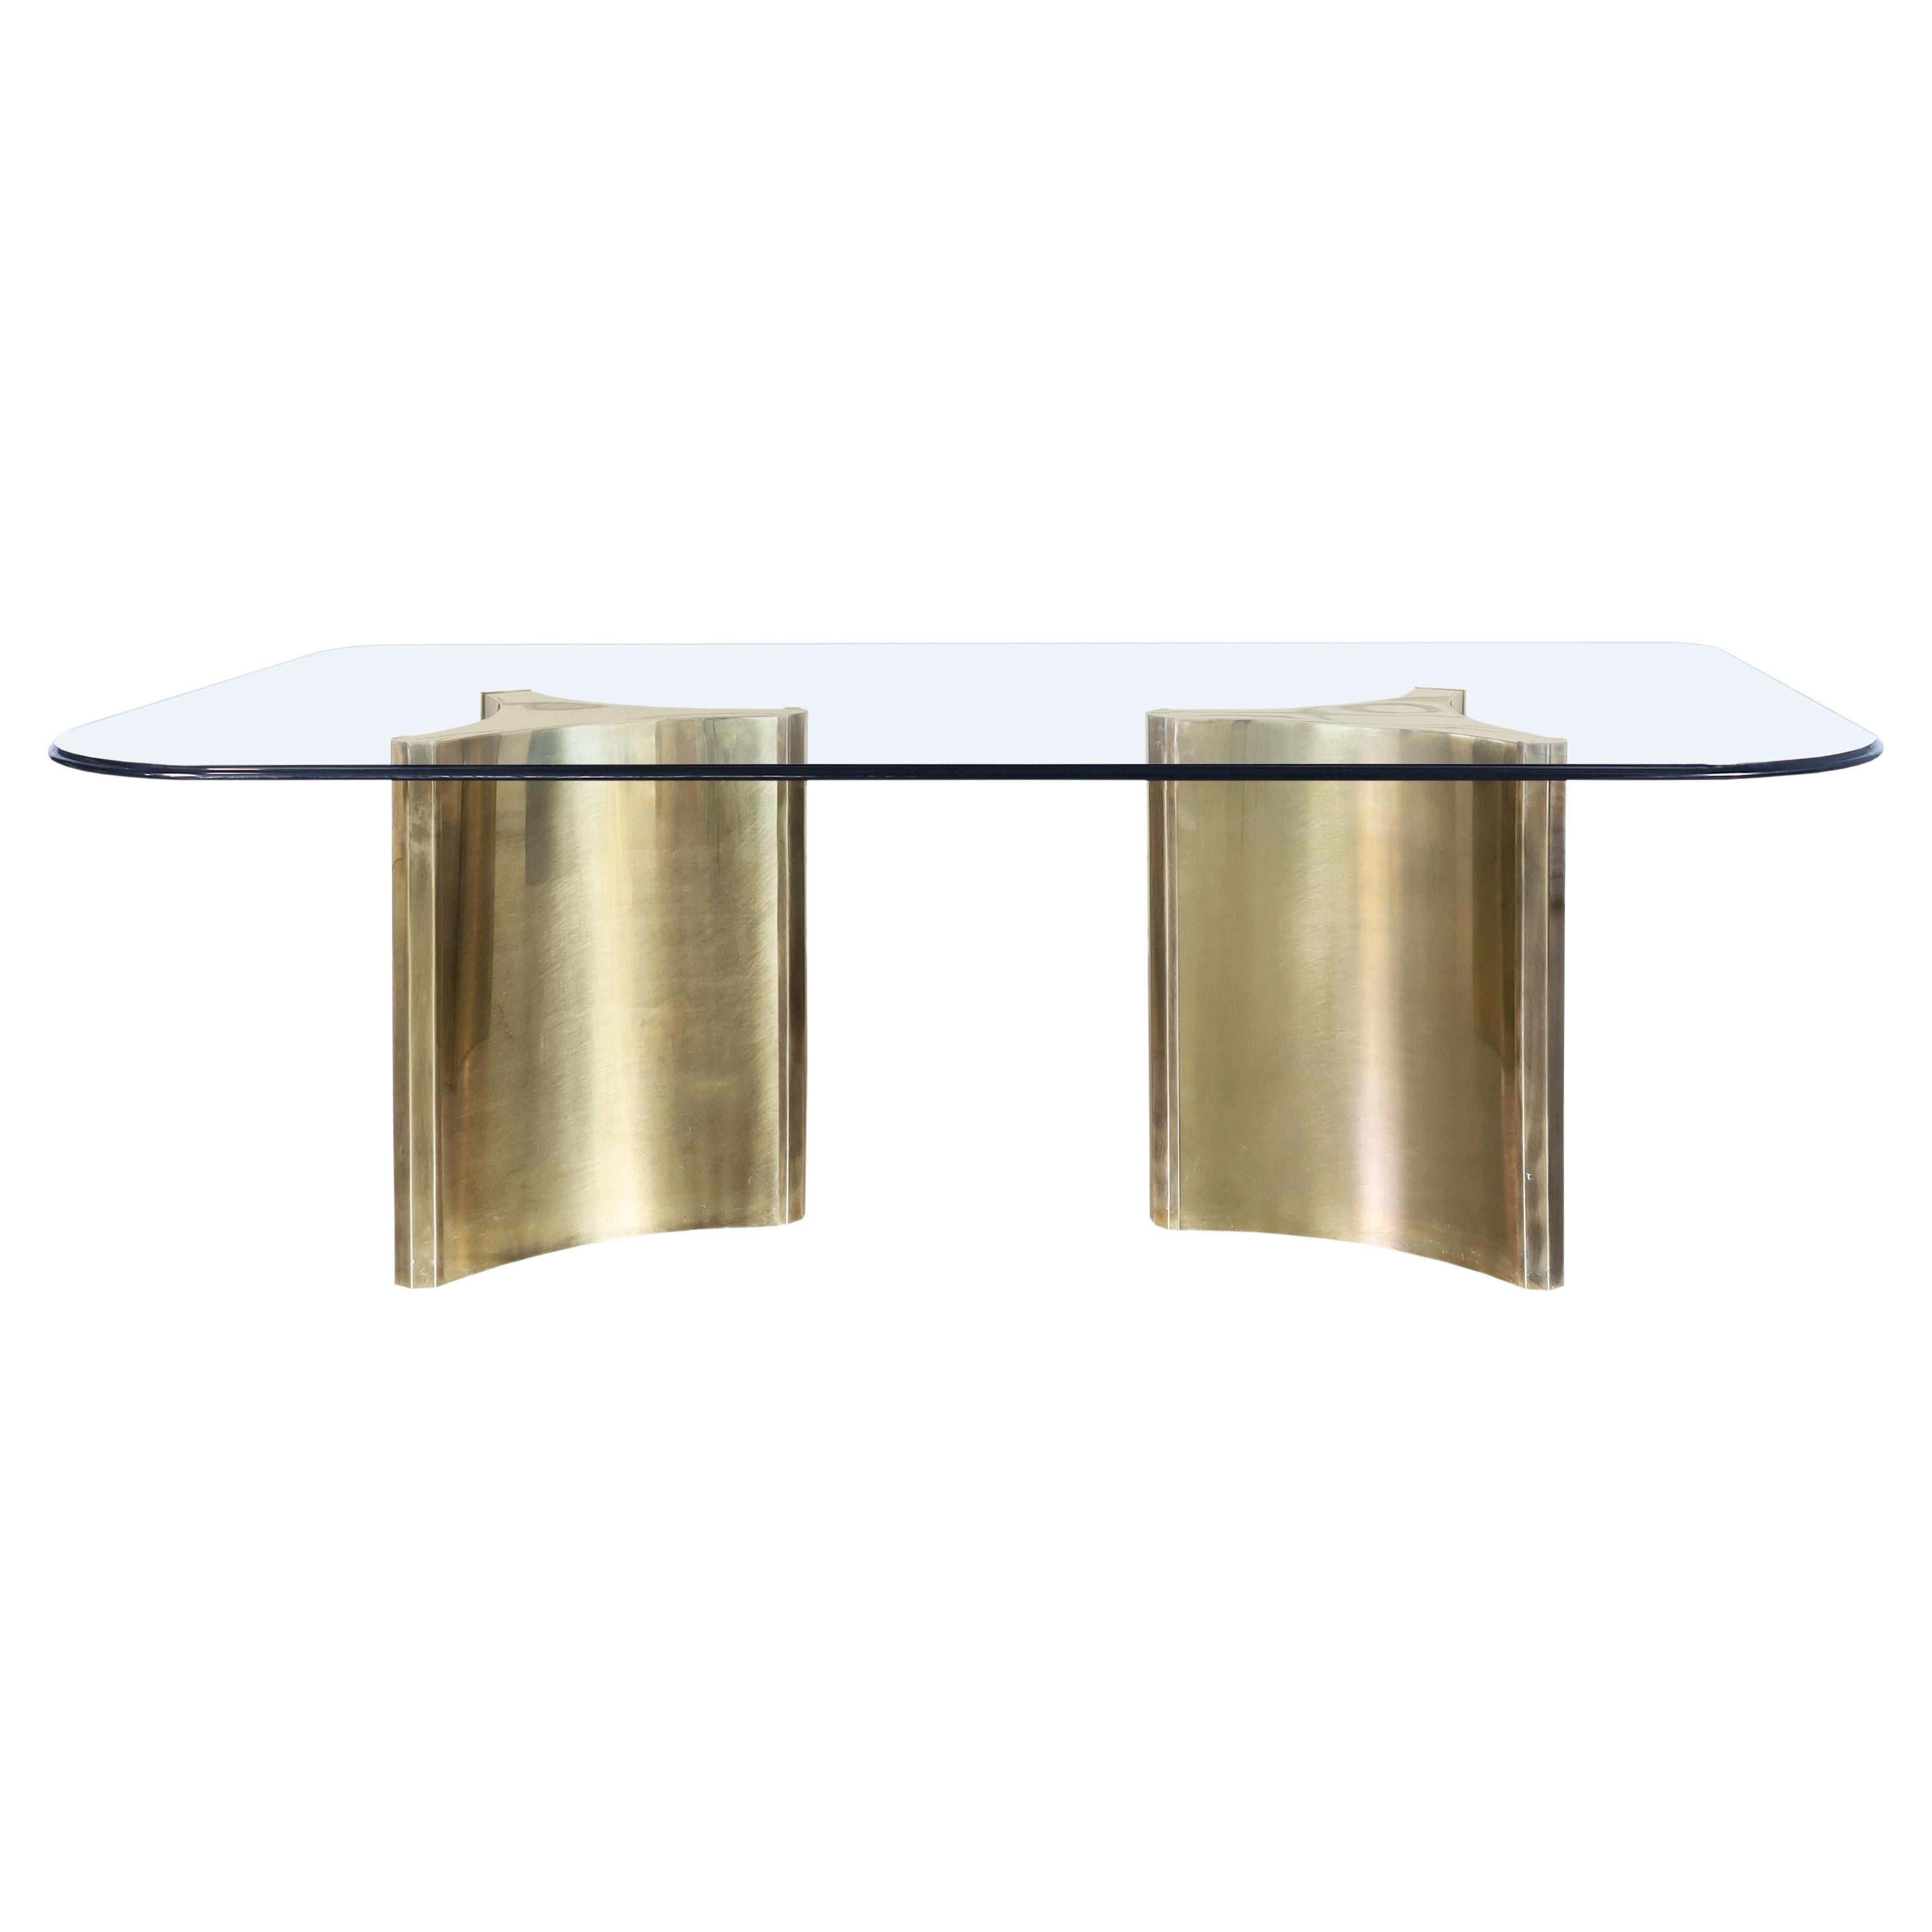 Vintage Brass and Glass "Trilobi" Dining Table by Mastercraft For Sale